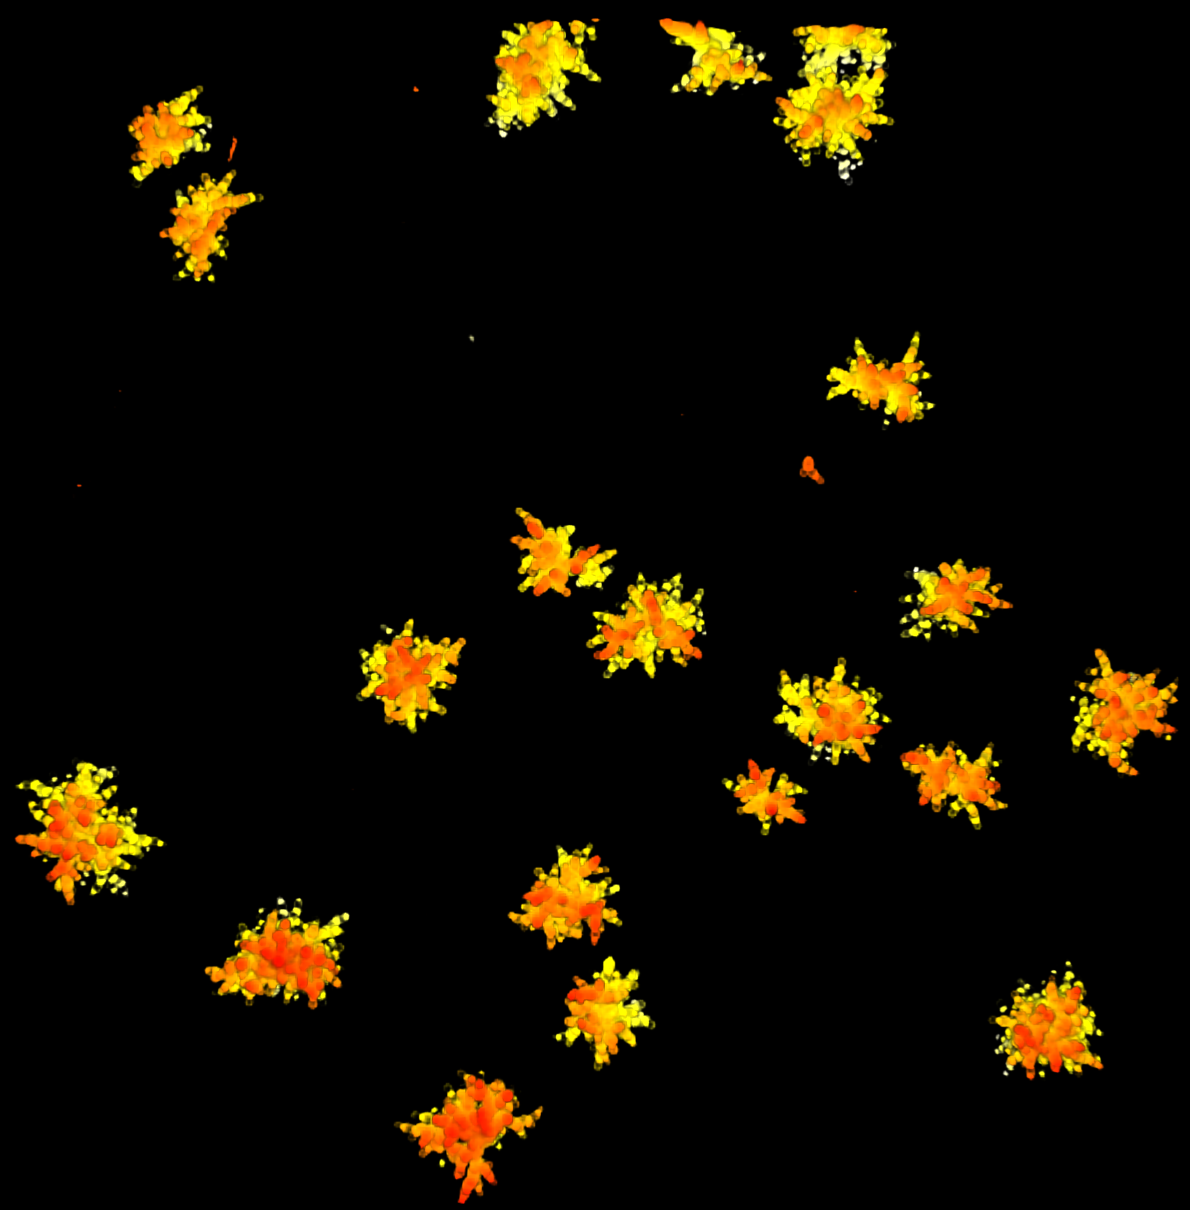 Graphics of yeast clusters from a simulation that tracked physics stresses that led the clusters to evolve a lifecycle. Credit: Georgia Tech / Yunker, Ratcliff